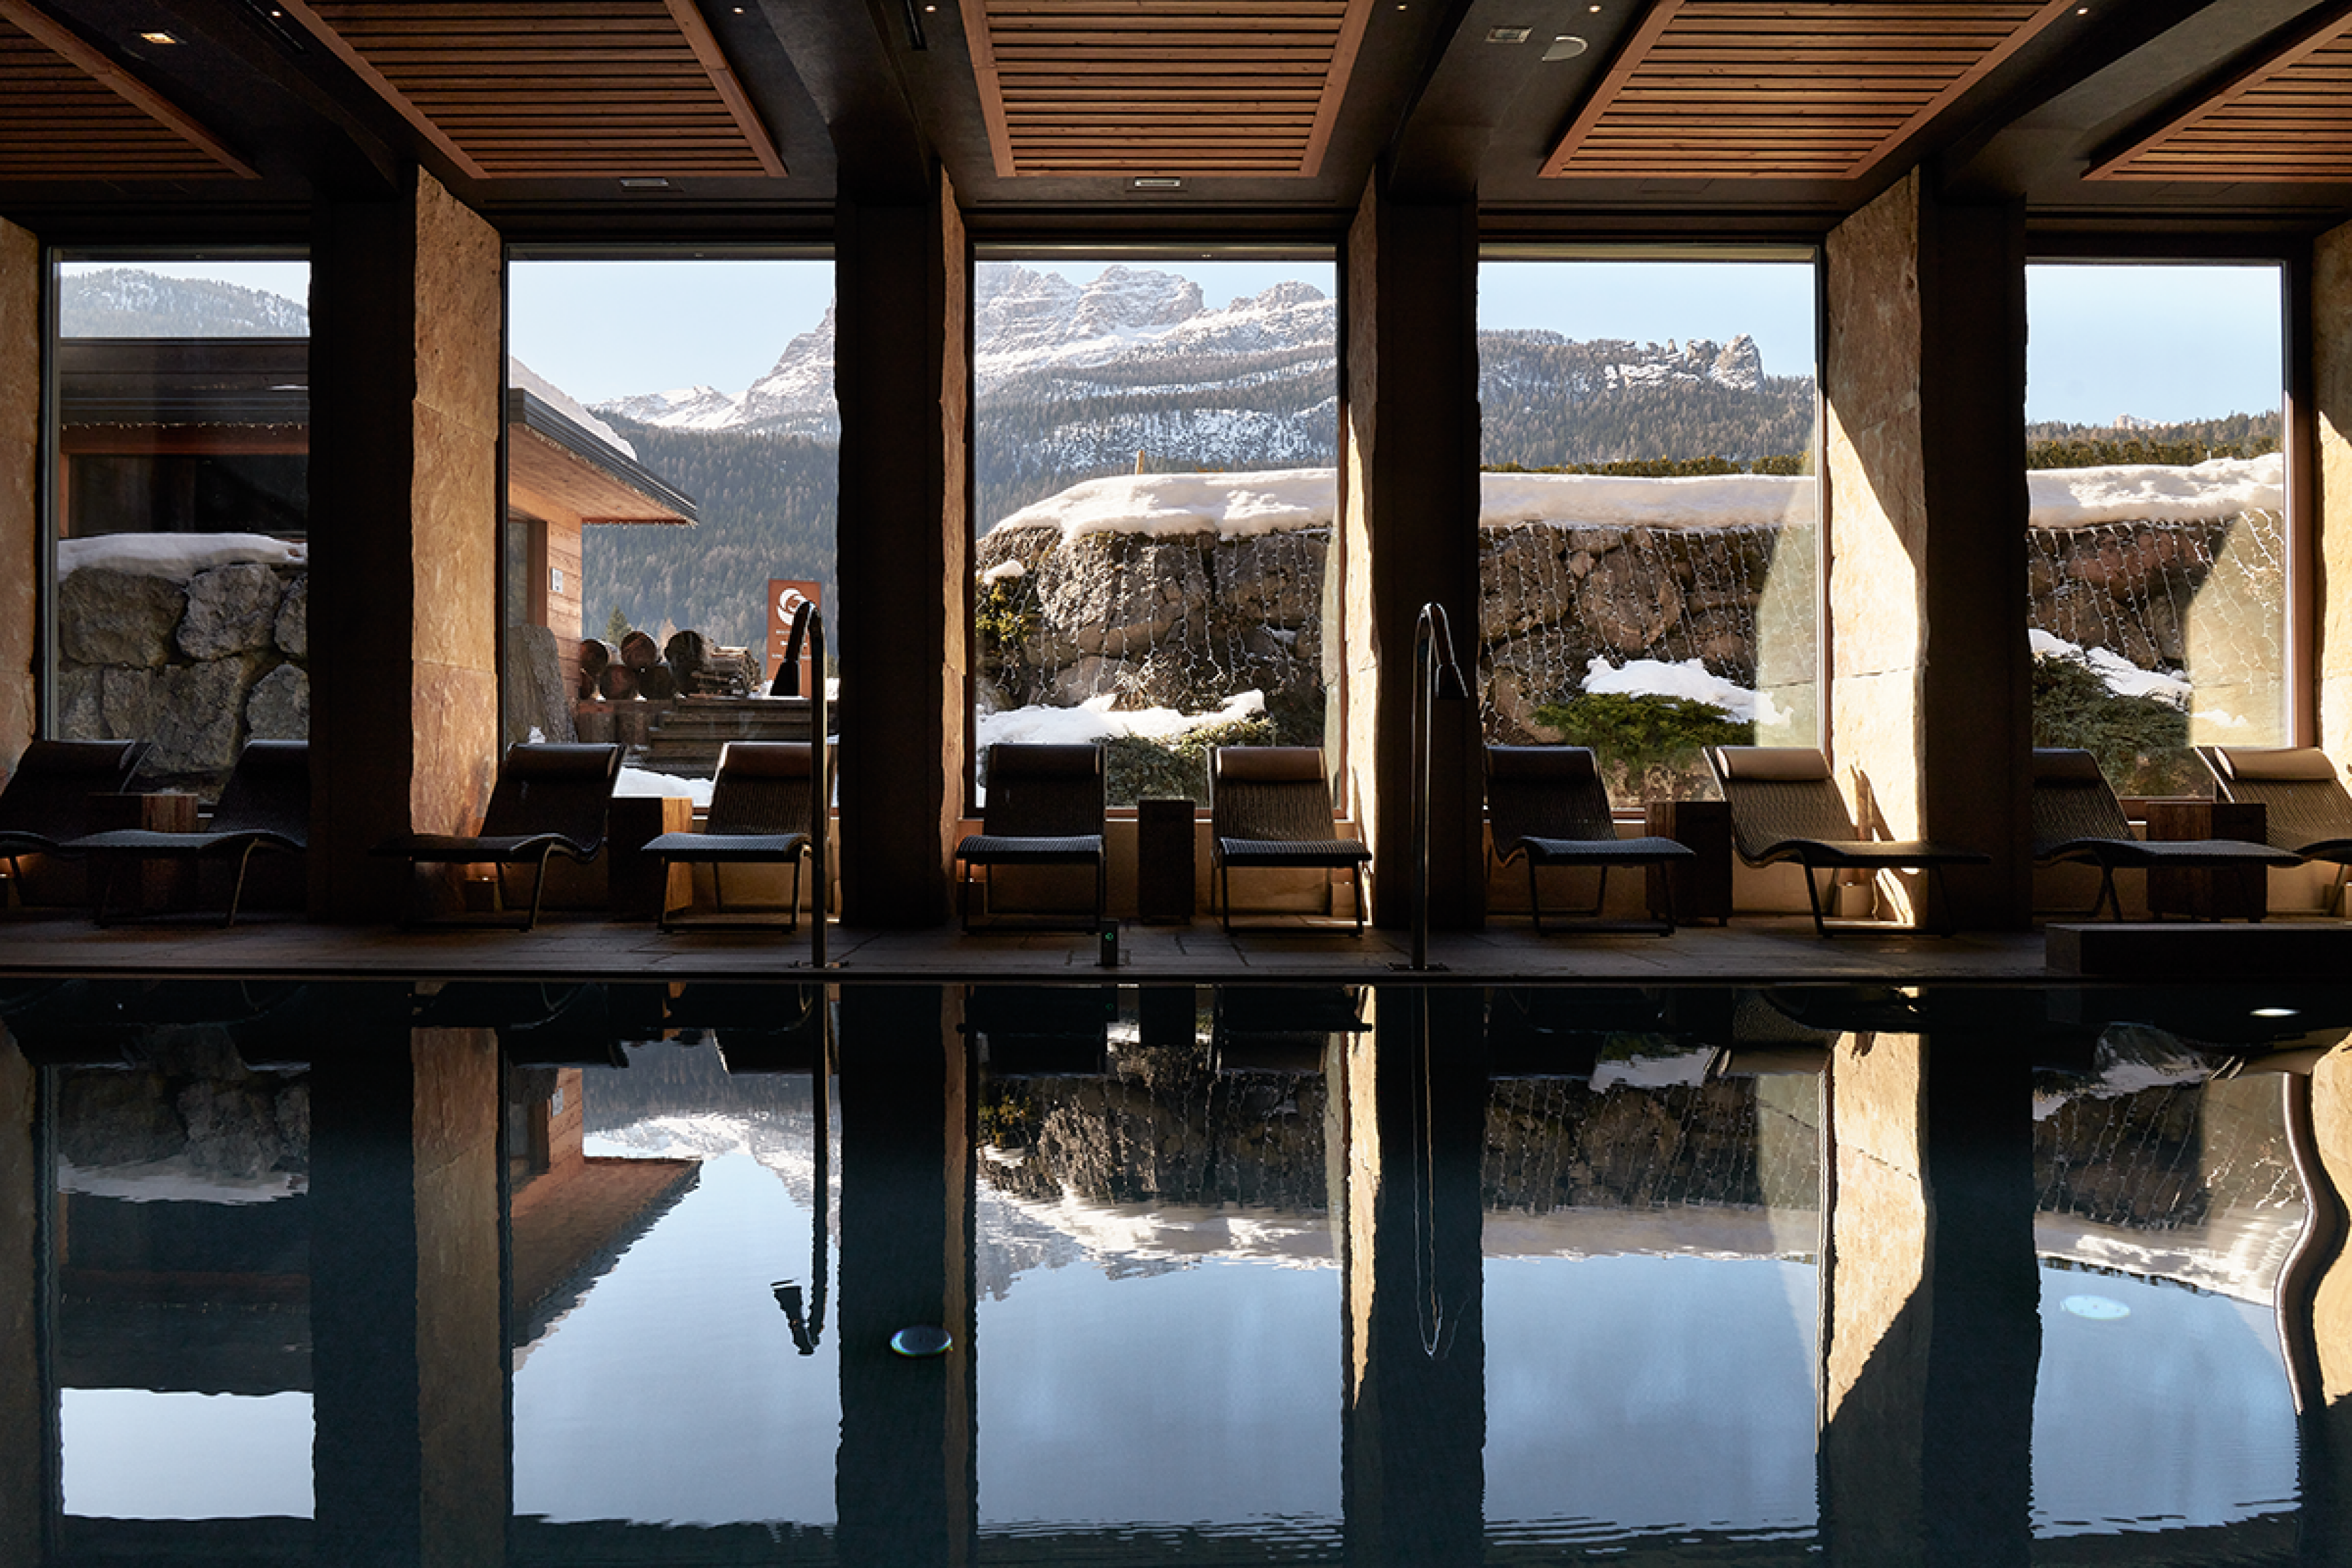 swimming pool lined with floor to ceiling windows overlooking mountains